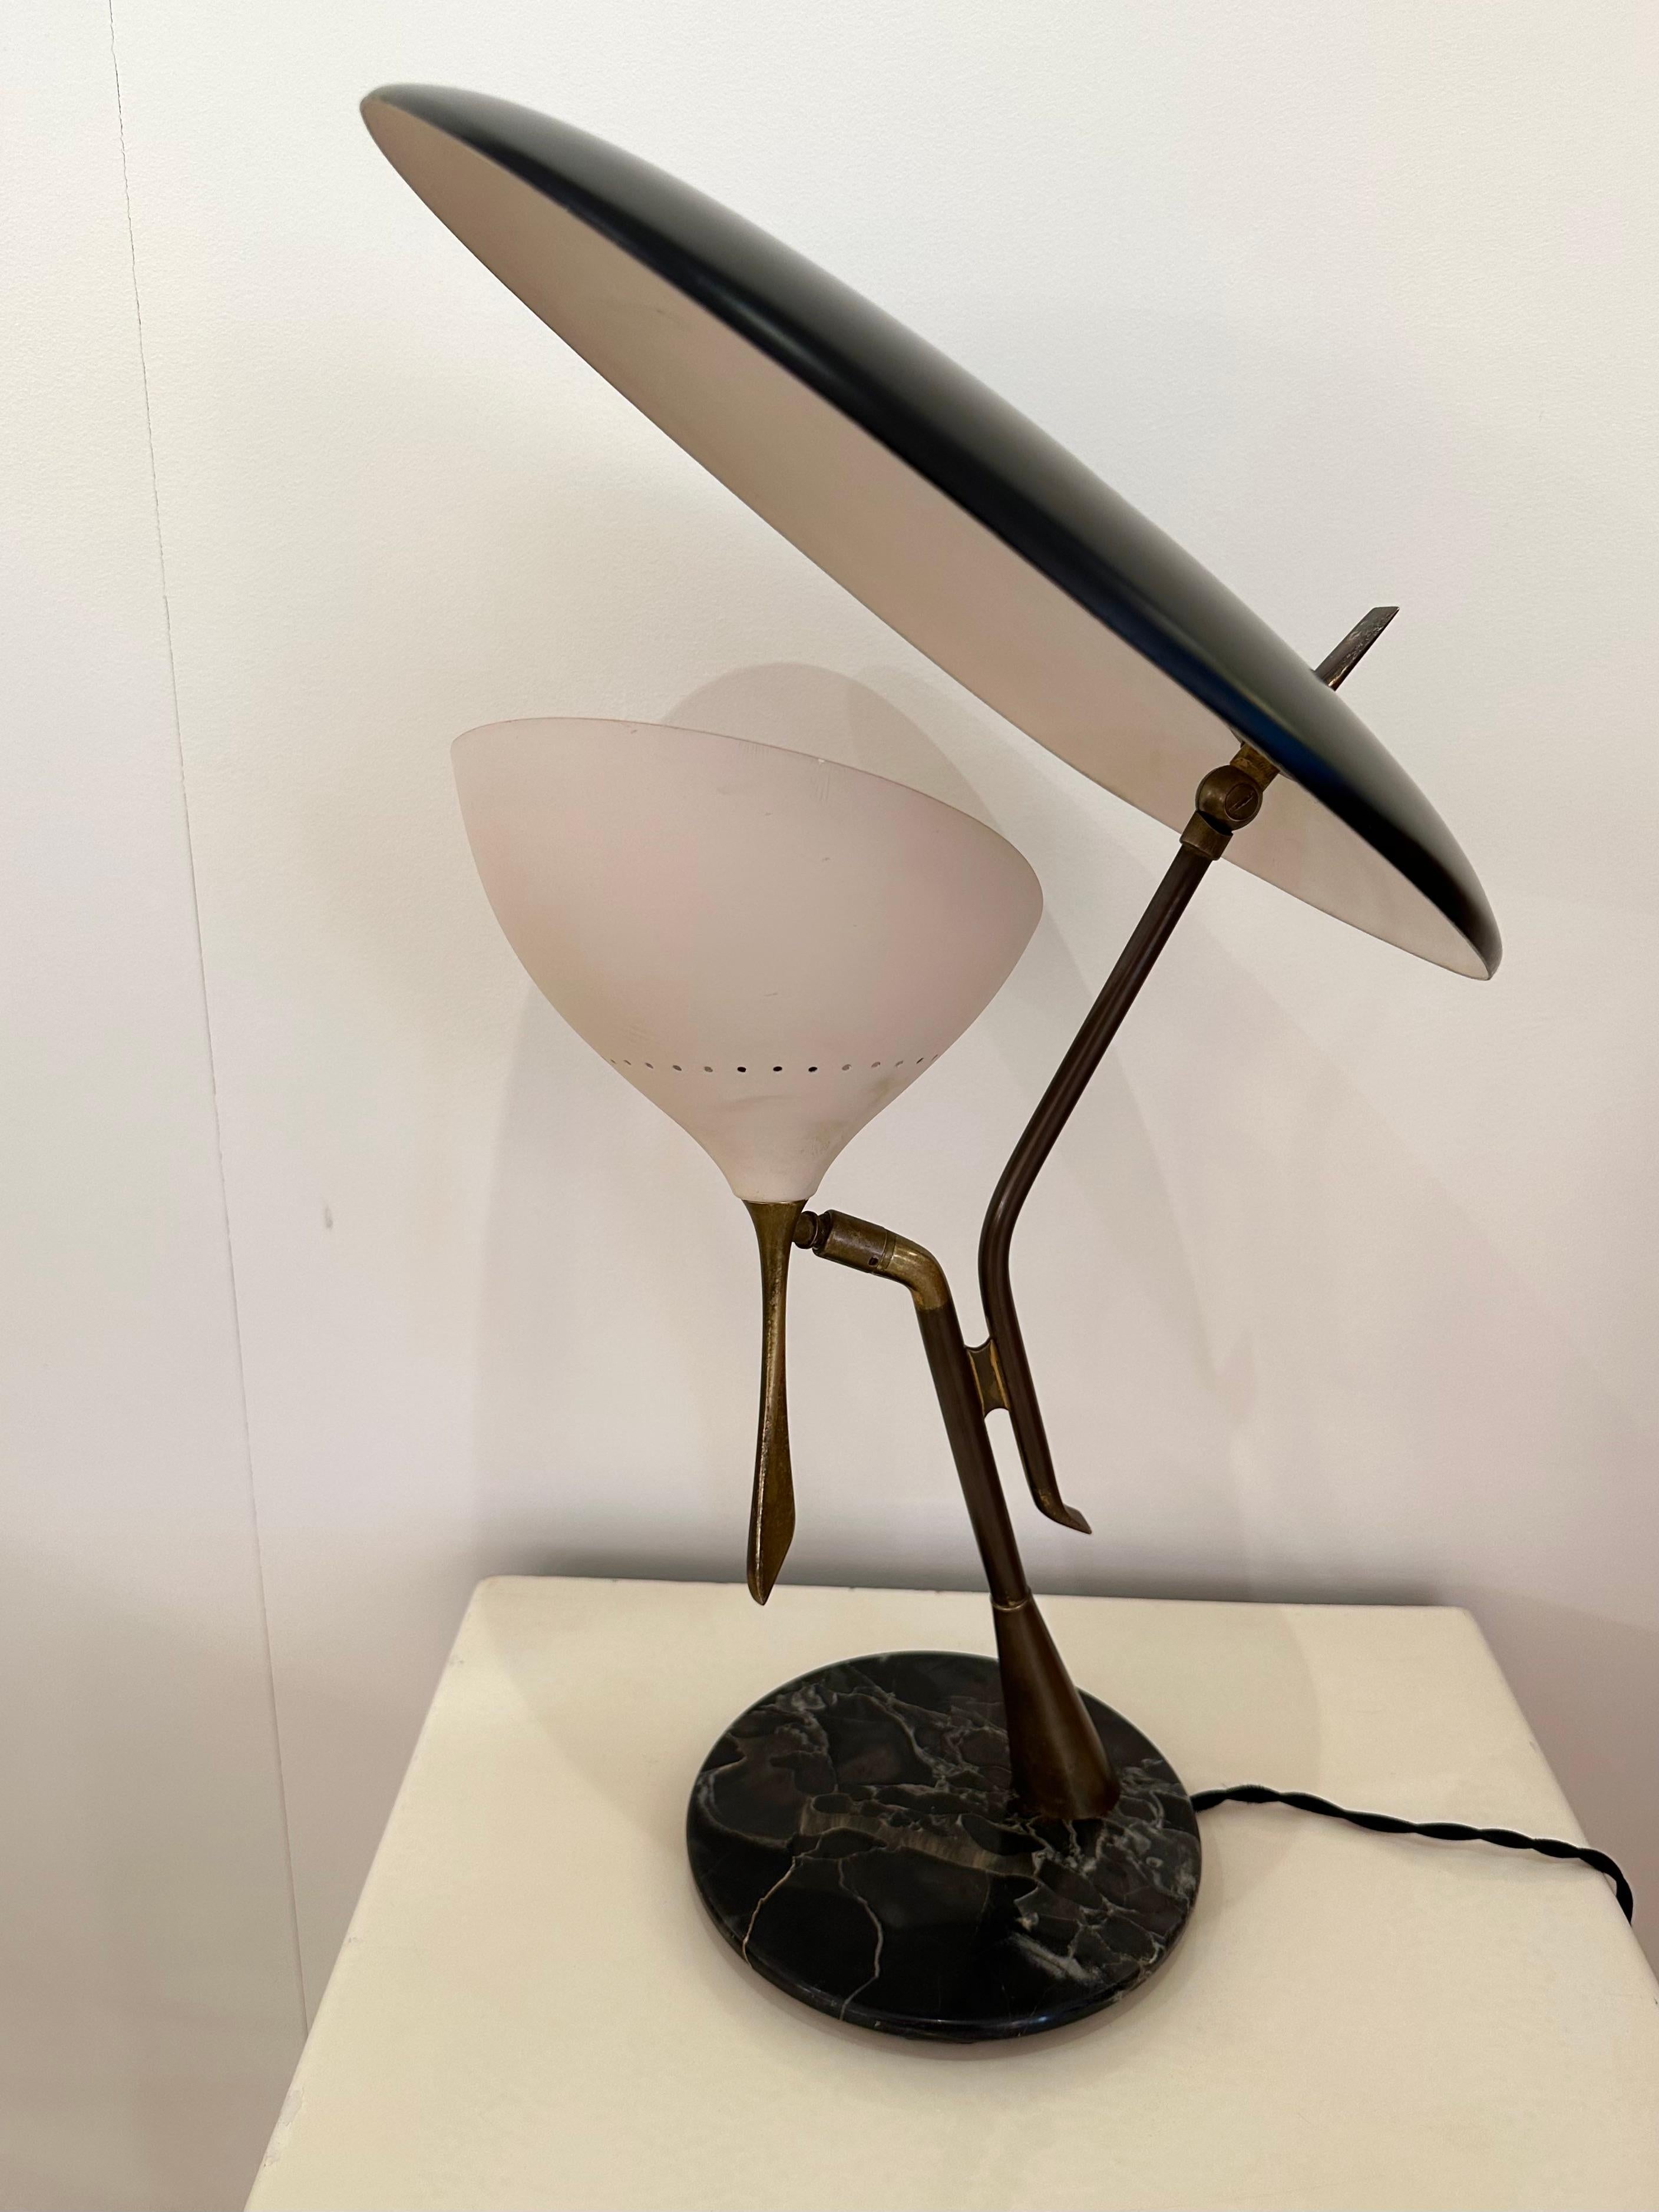 Mid-Century Modern Midcentury Desk Lamp Painted Metal, Brass, Marble by Lumen, Italy, 1950s For Sale